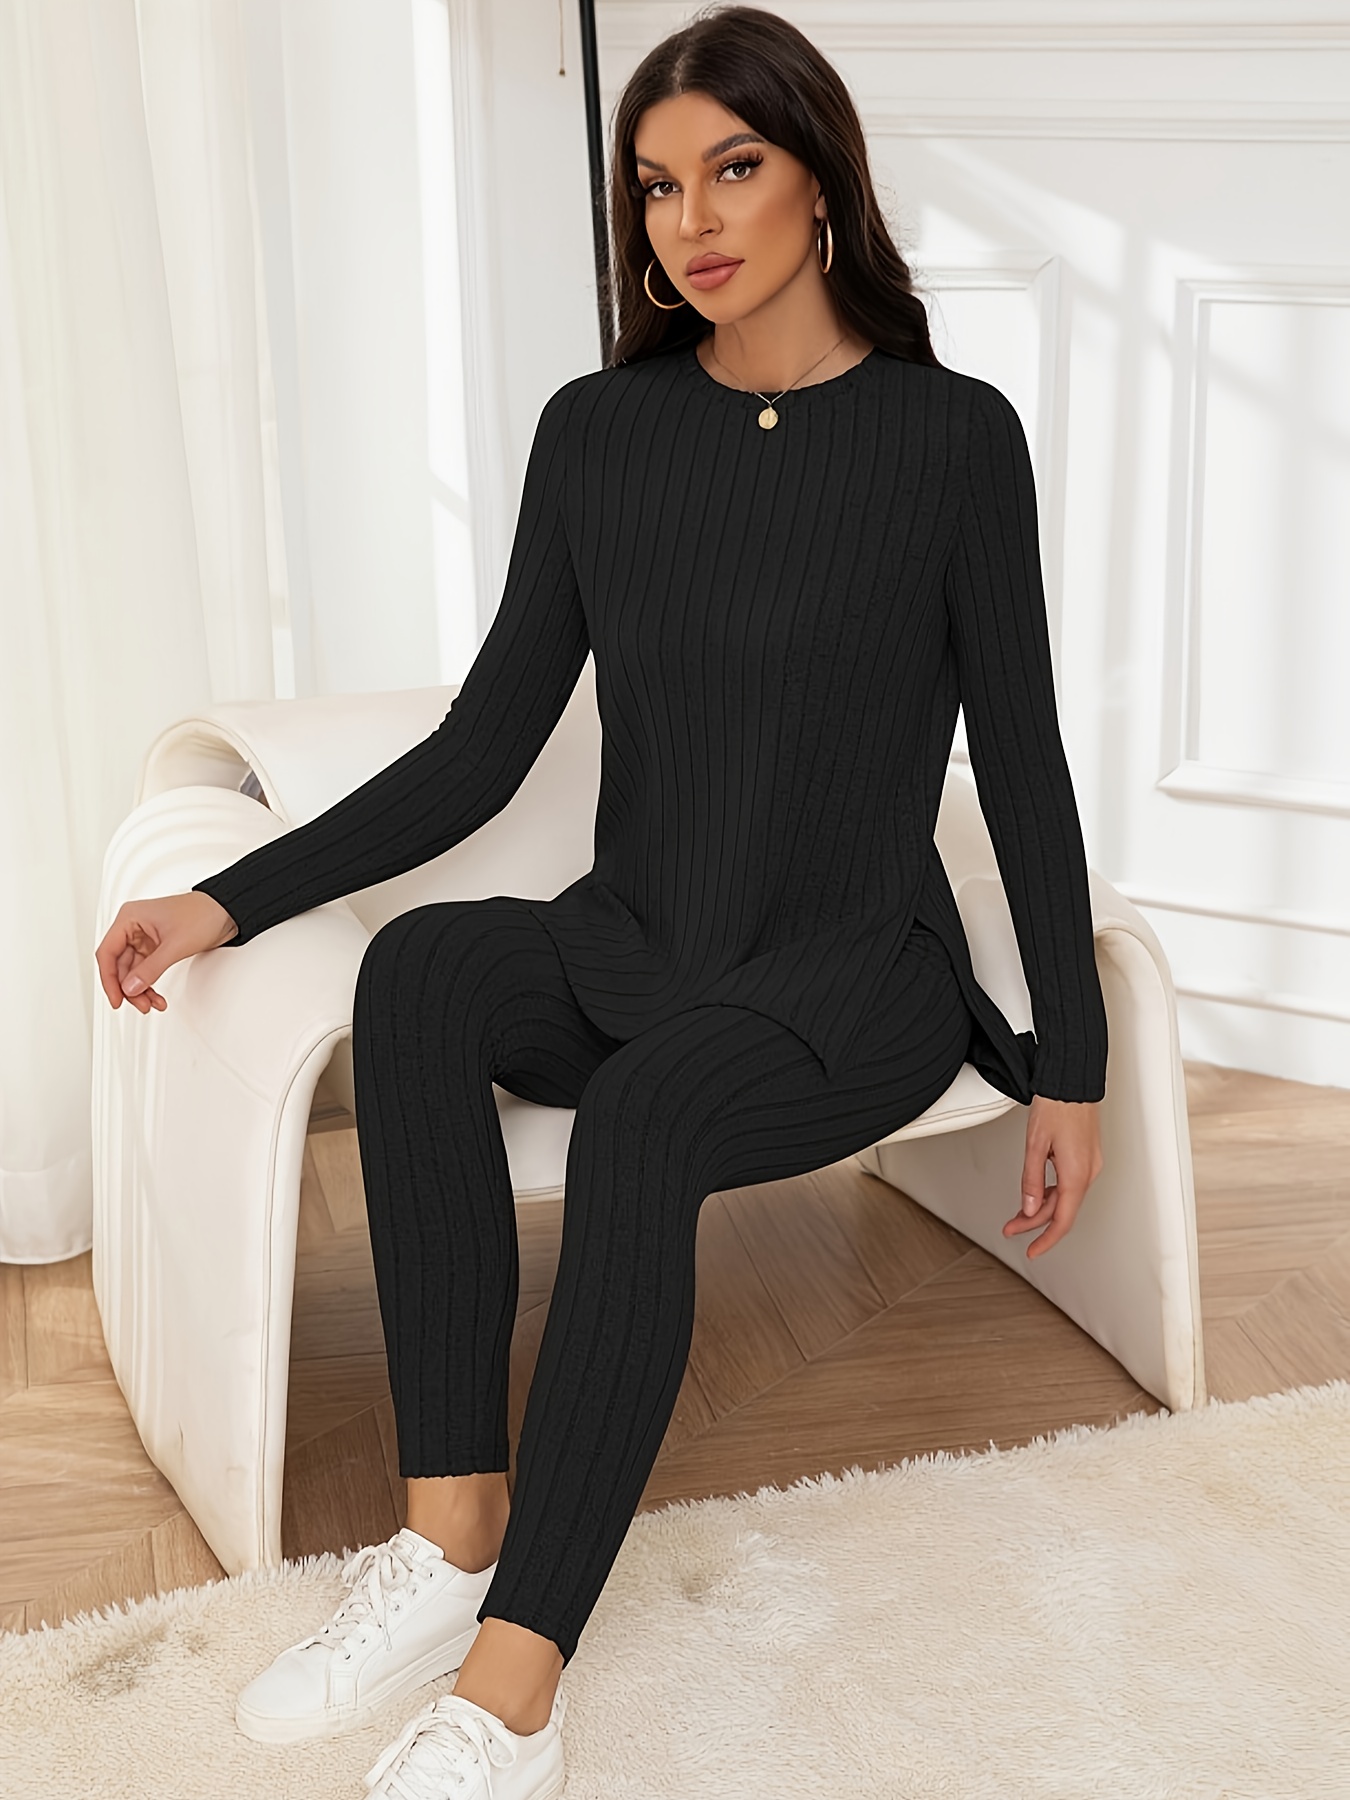 Women's Casual Ribbed Knit 2 Piece Outfit Long Sleeve Sweater